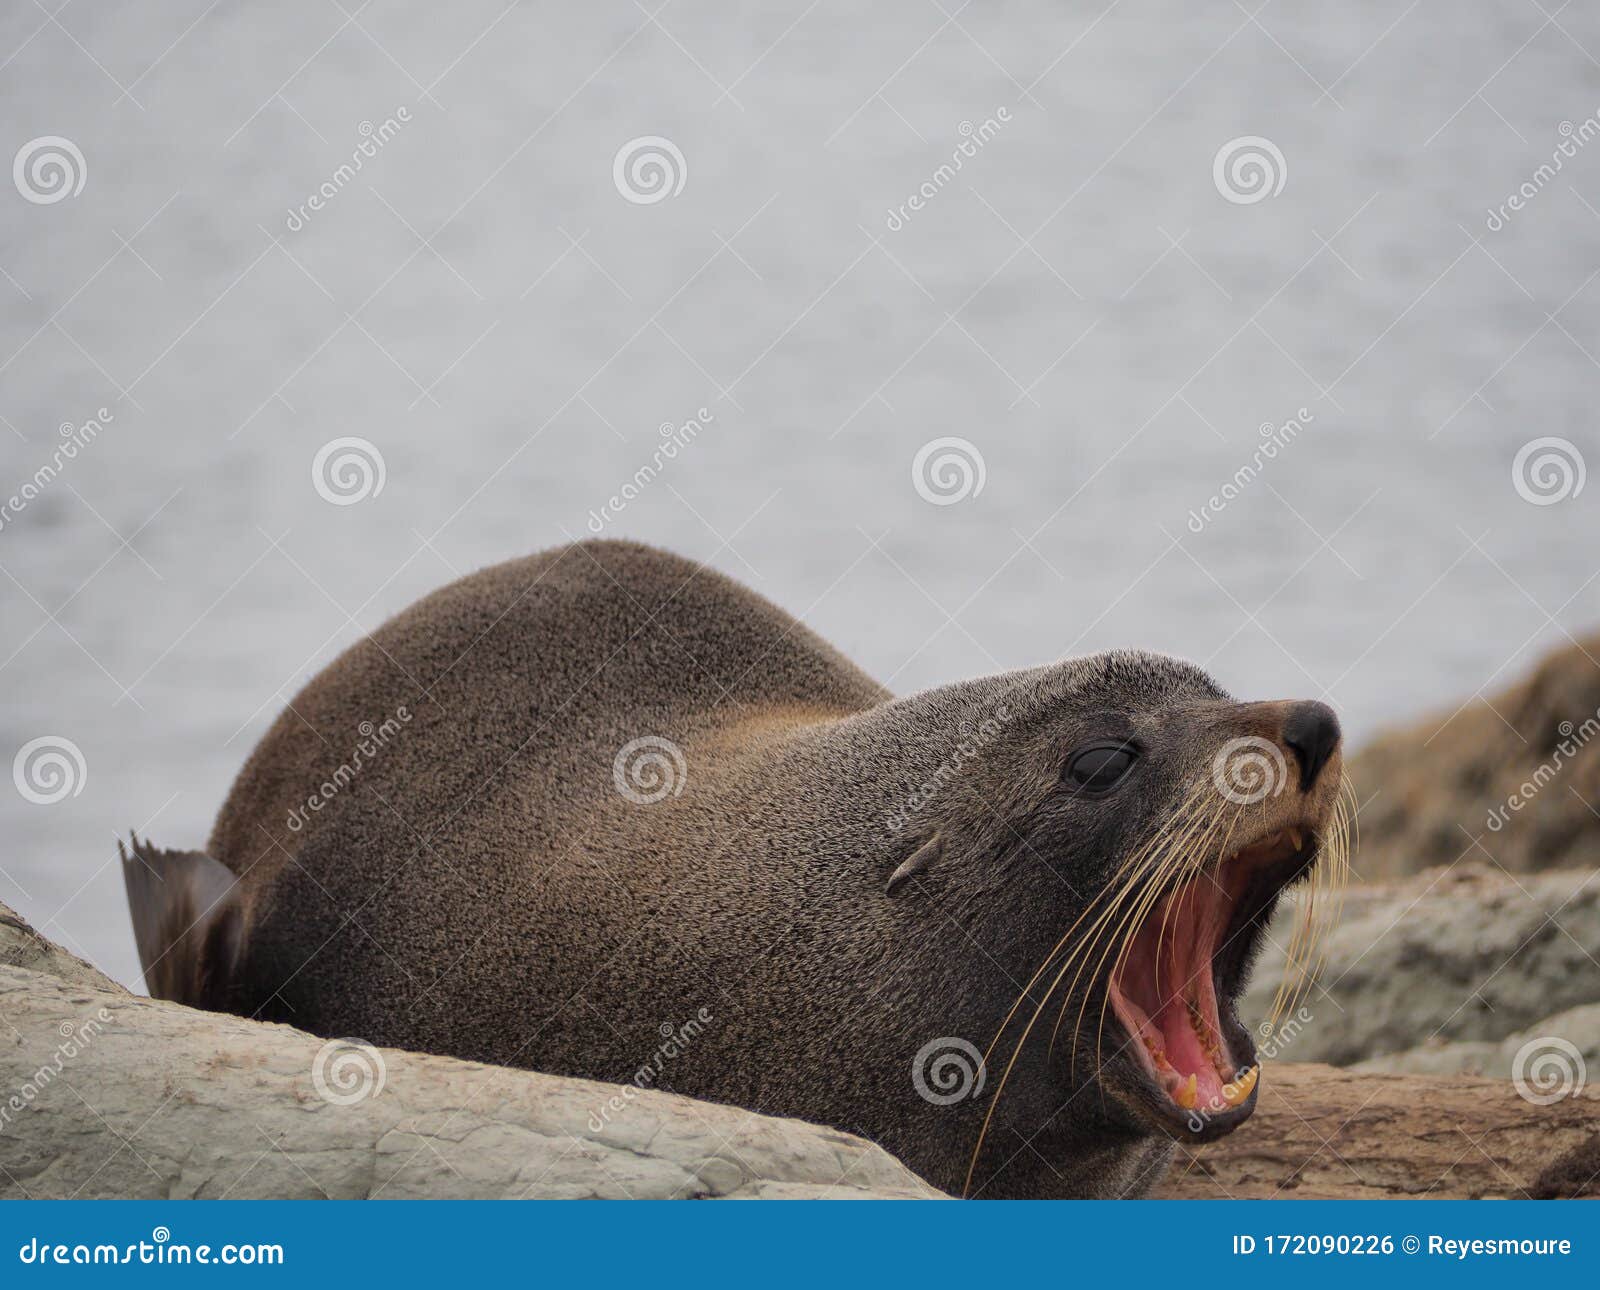 sea lion with open mouth.